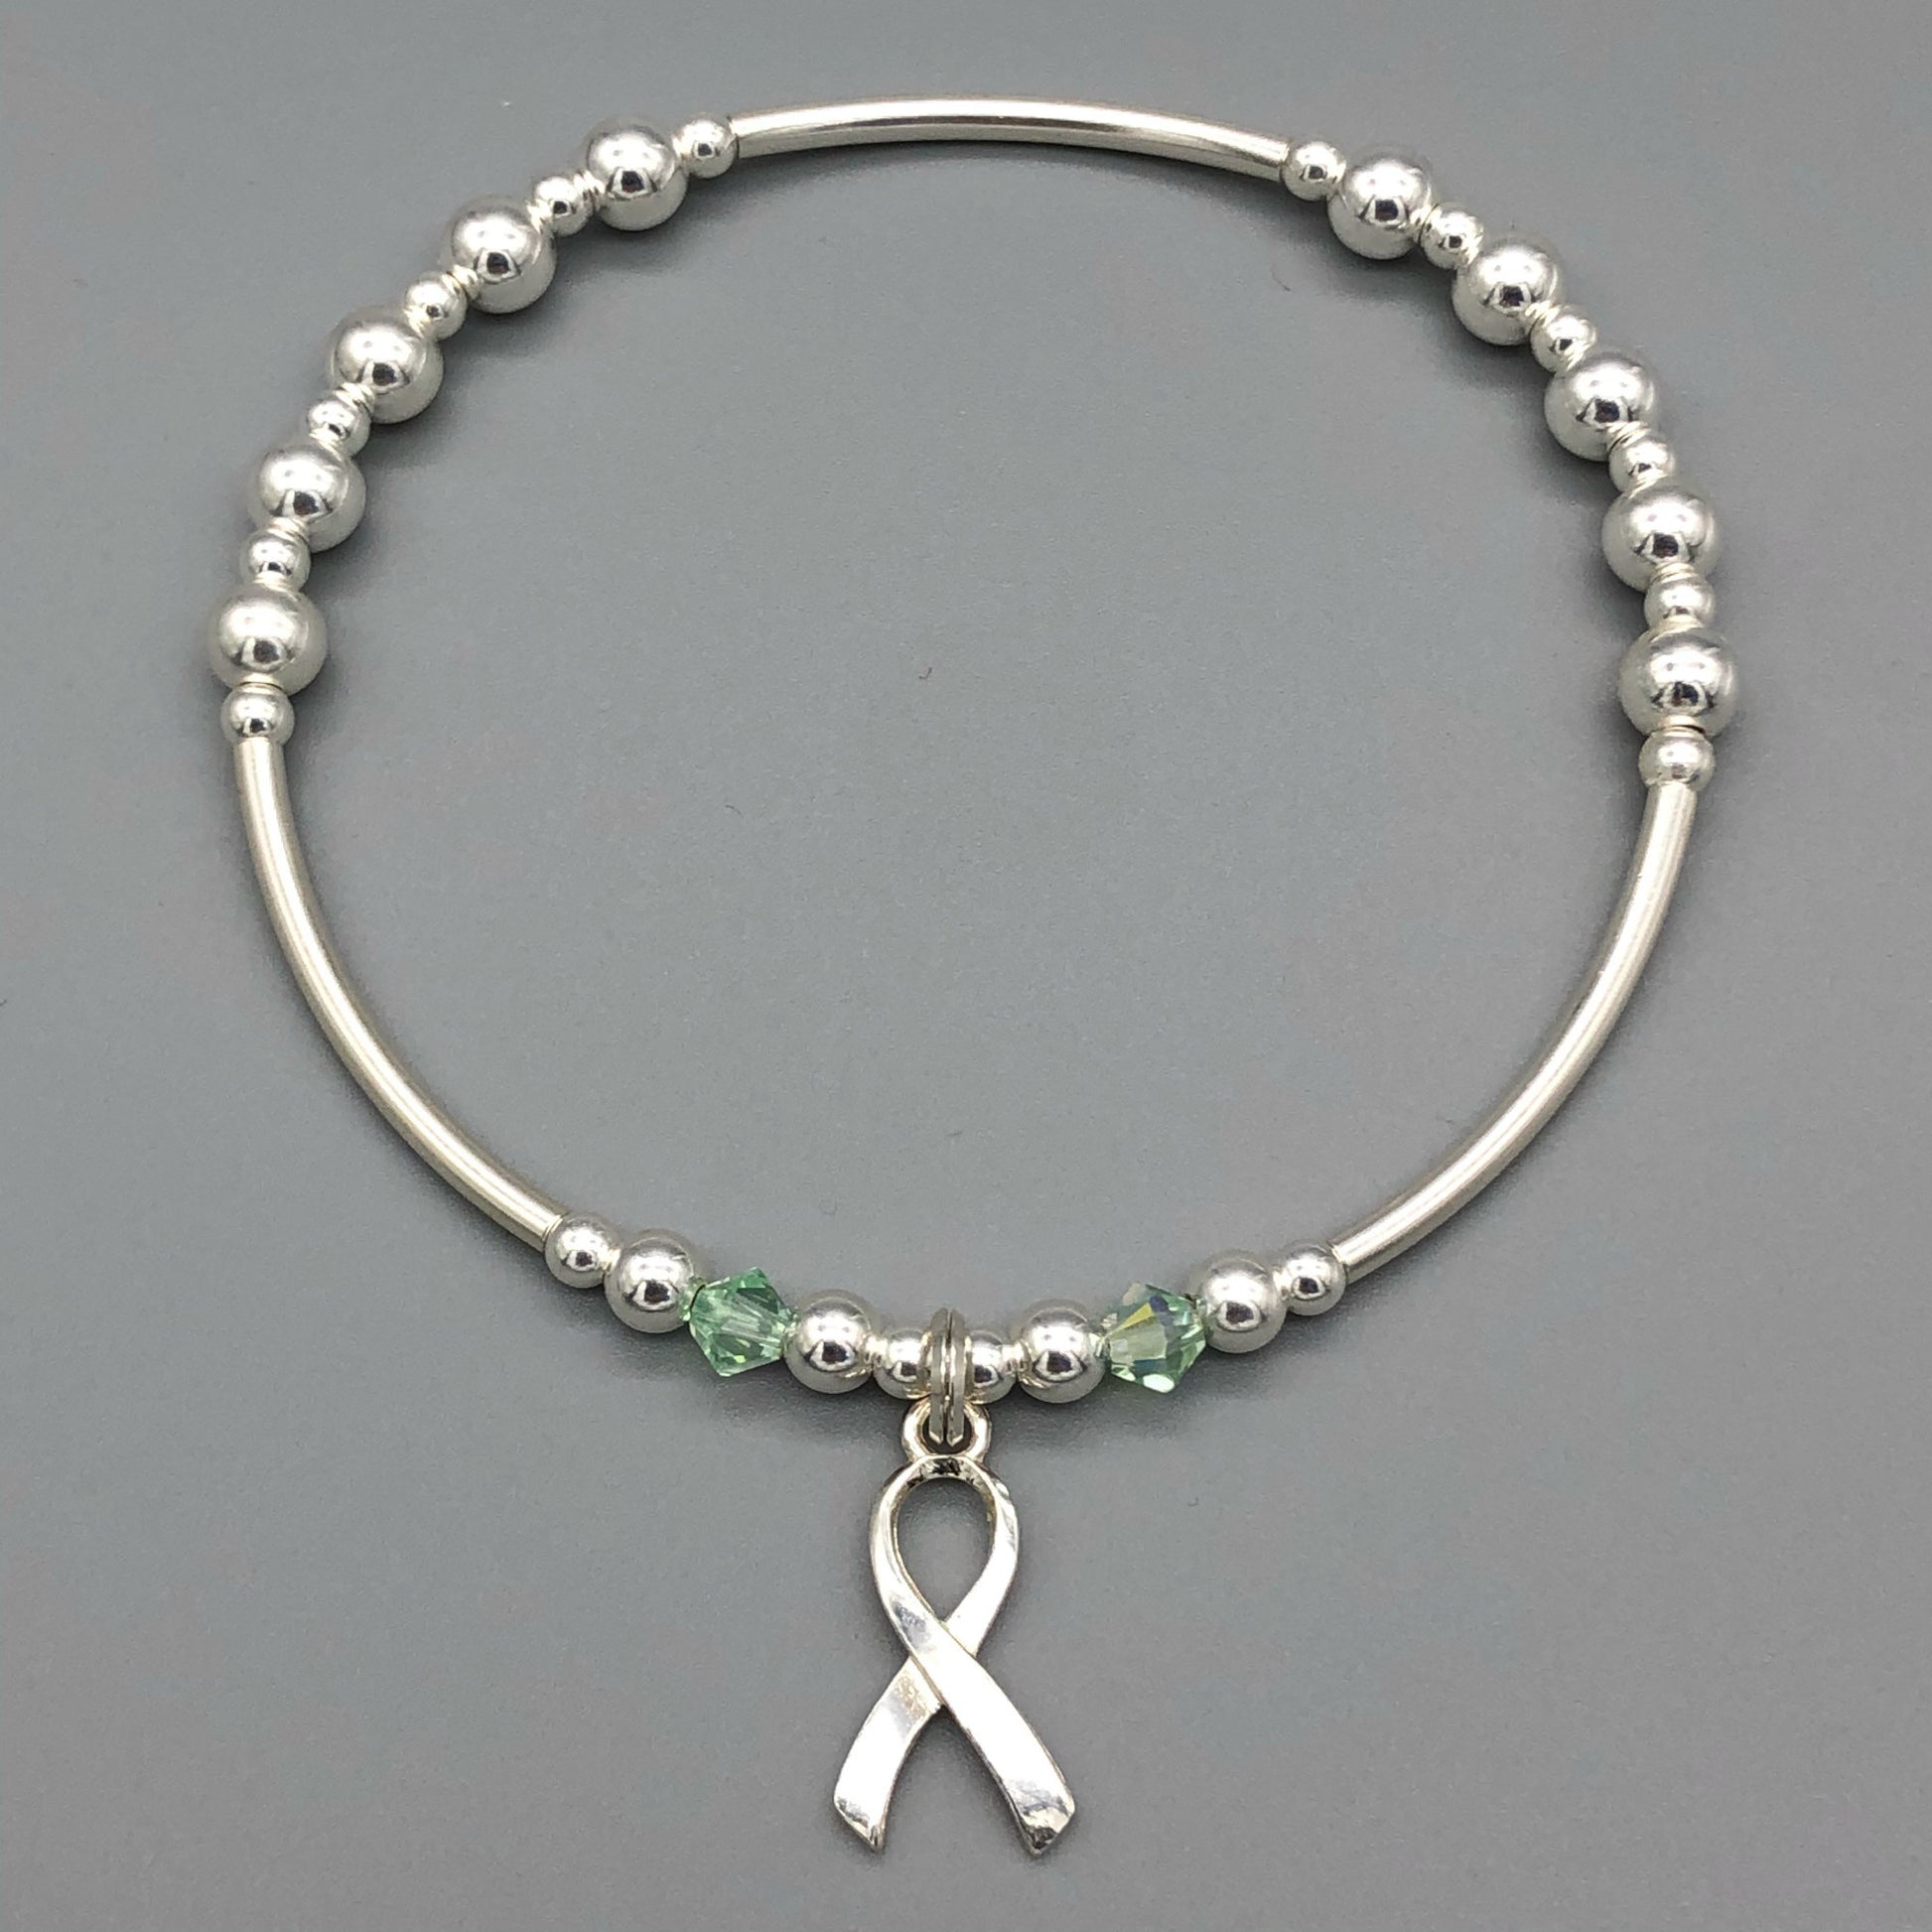 Mental Health Awareness ribbon charm sterling silver hand-made women's stacking bracelet by My Silver Wish